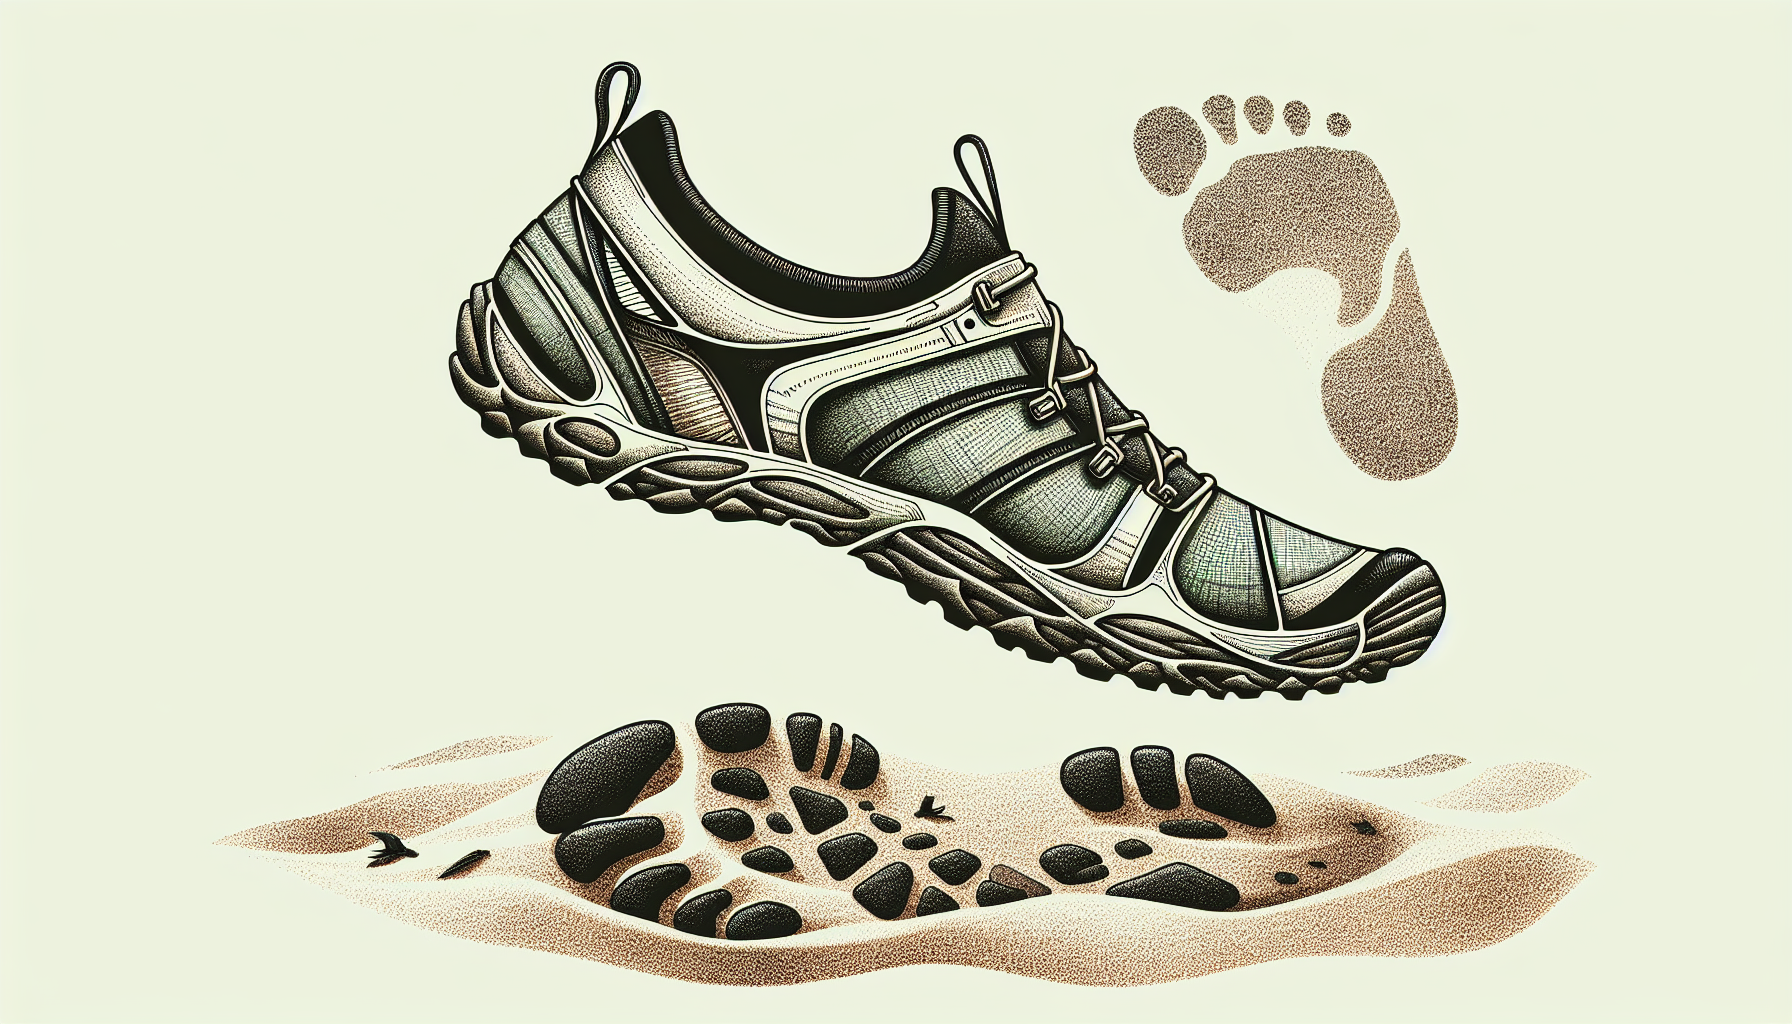 Illustration of barefoot shoes with wide toe boxes and zero-drop heels